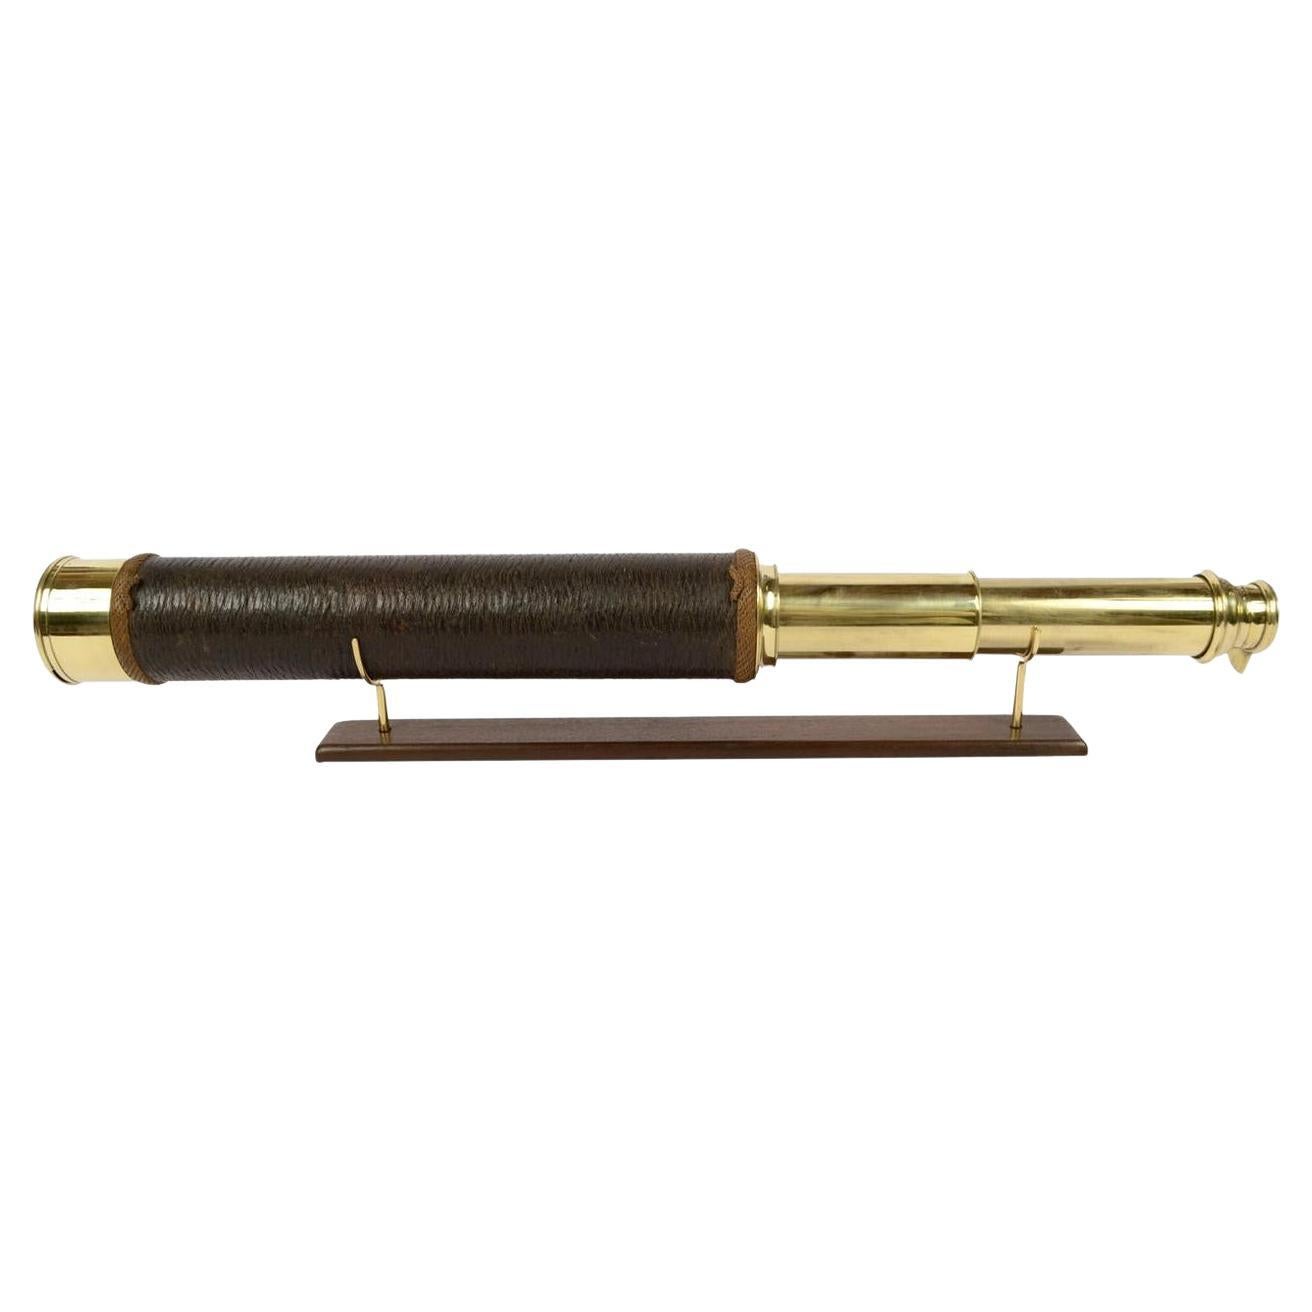 Antique Nautical Telescope, Brass and Rope, Mid-19th Century